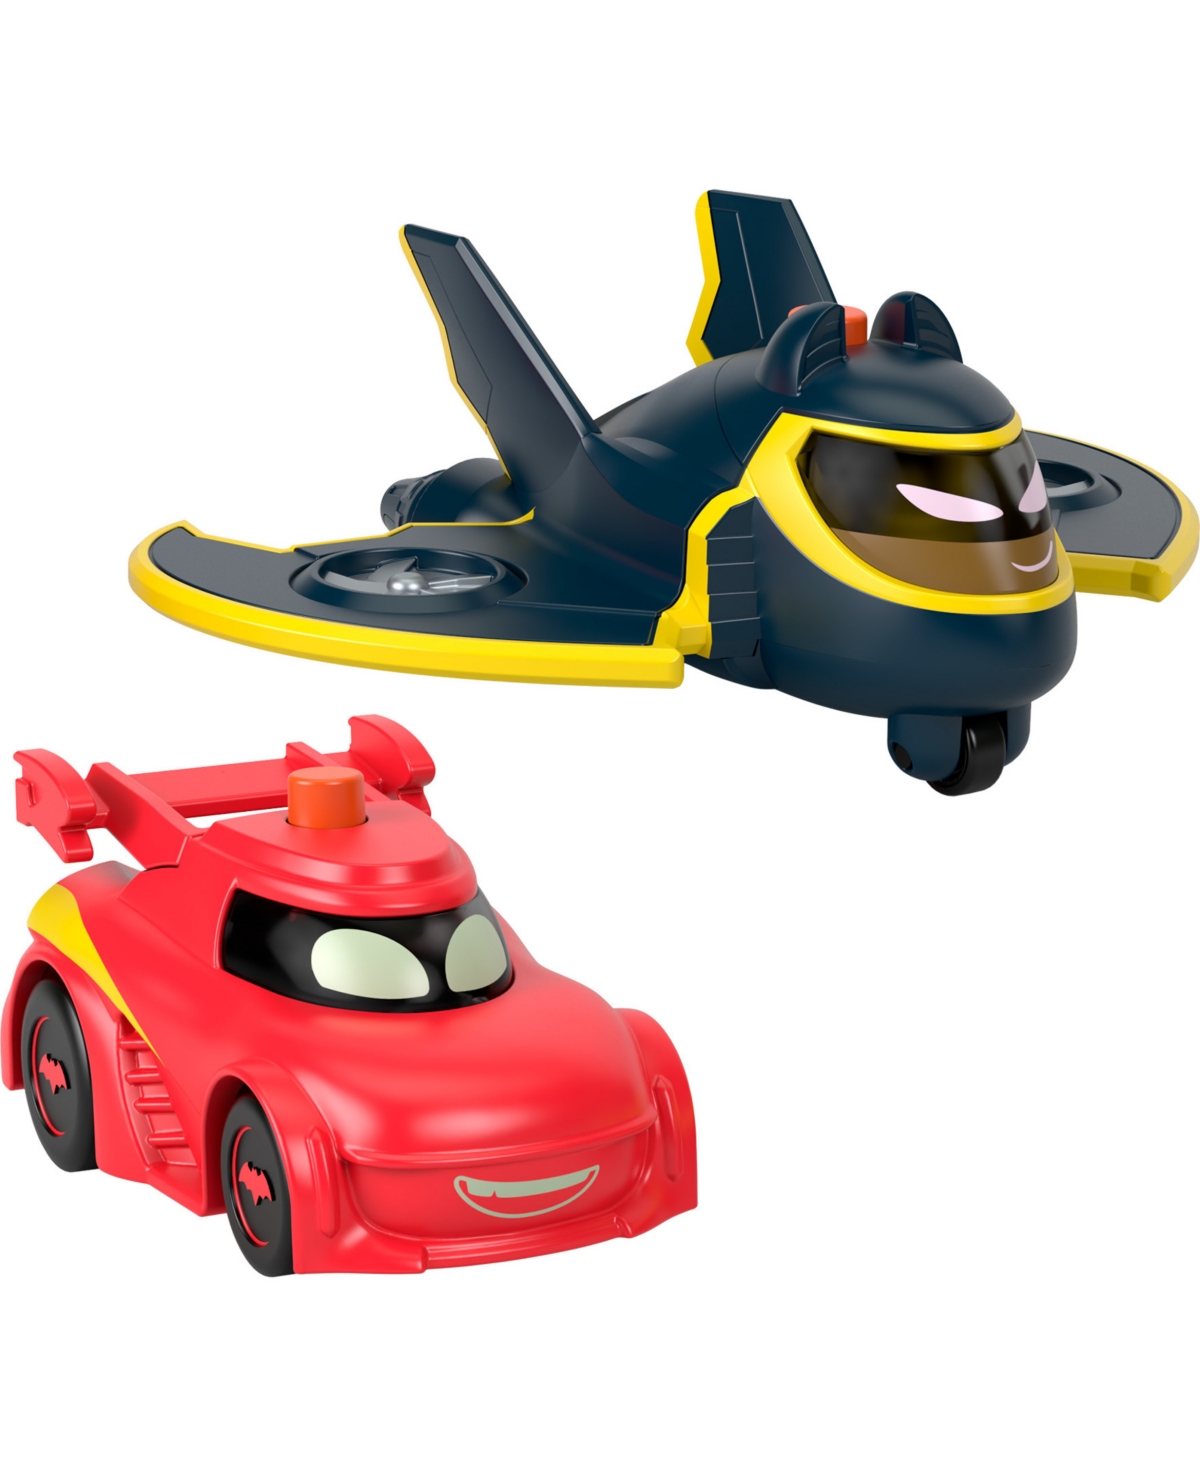 Batwheels Kids' Fisher-price Dc Light-up Toy Cars, Redbird And Batwing, 2-piece Preschool Toys Set In Multi-color